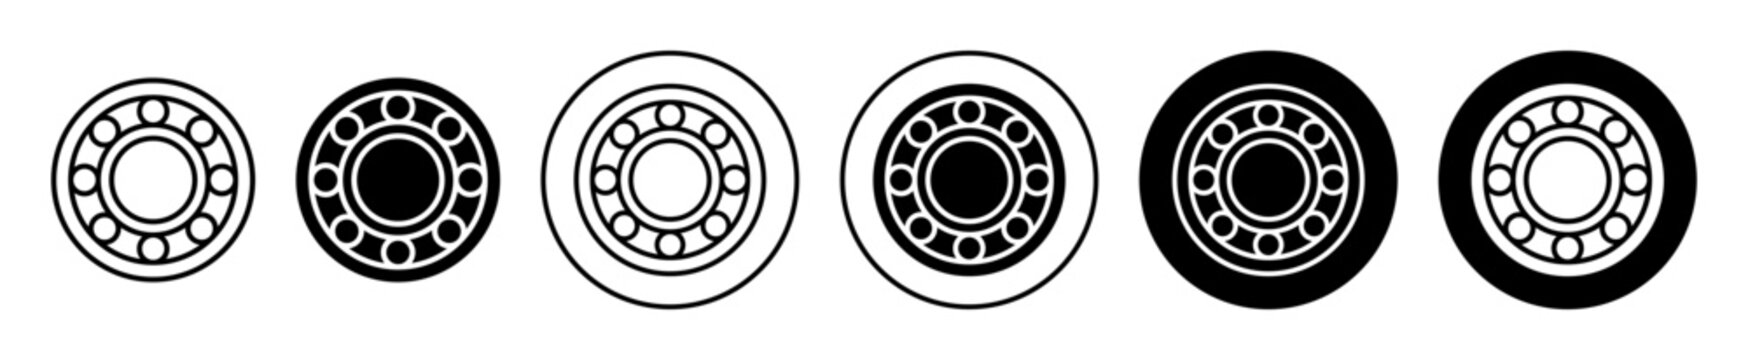 Ball Bearing Icon set. friction bearing vector symbol in black filled and outlined style.